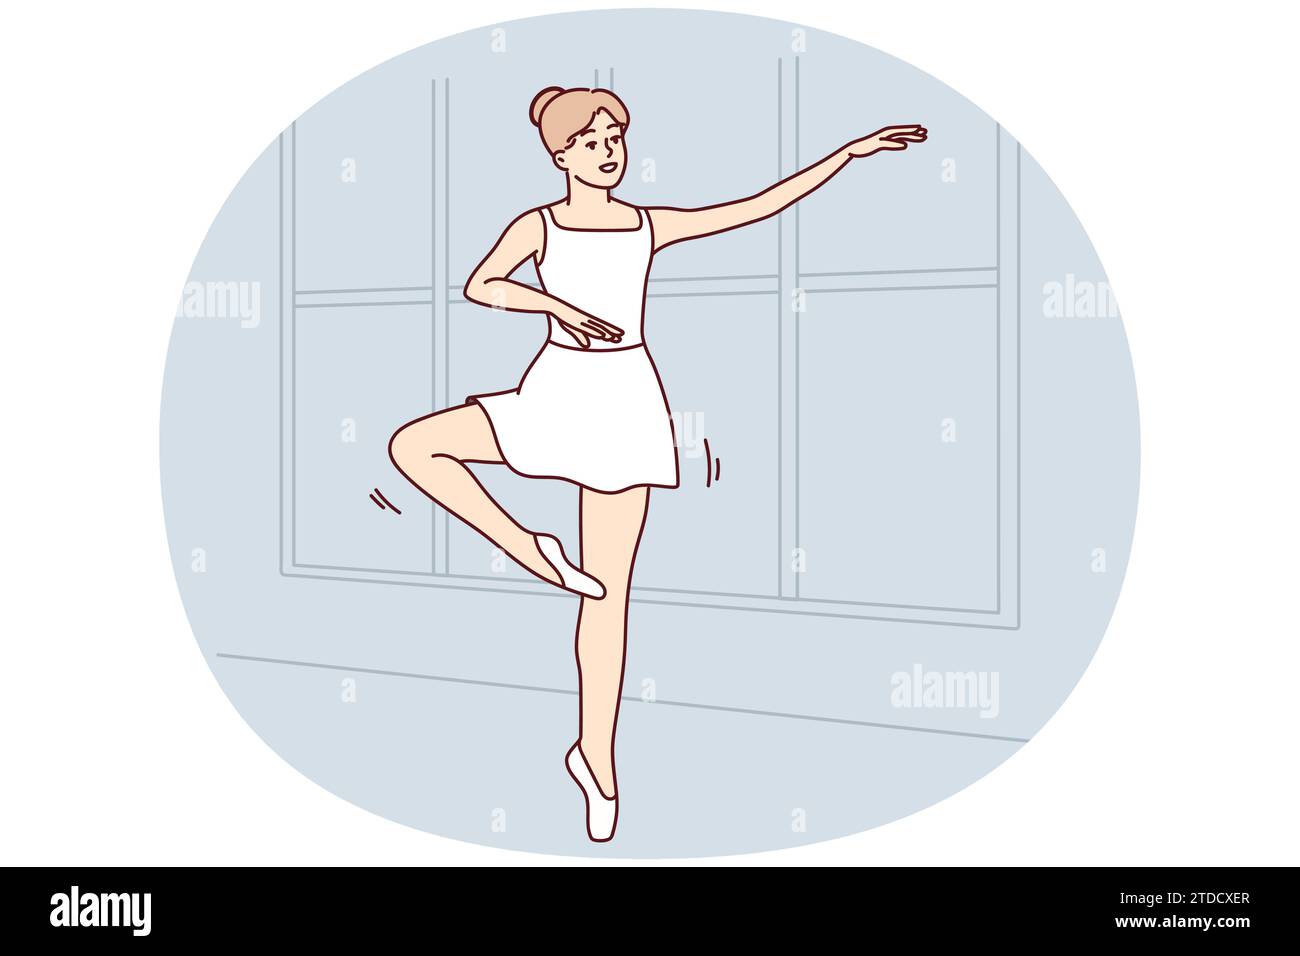 Young woman in tutu dancing in school. Smiling girl in dress practice ballerina moves indoors. Hobby and entertainment. Vector illustration. Stock Vector